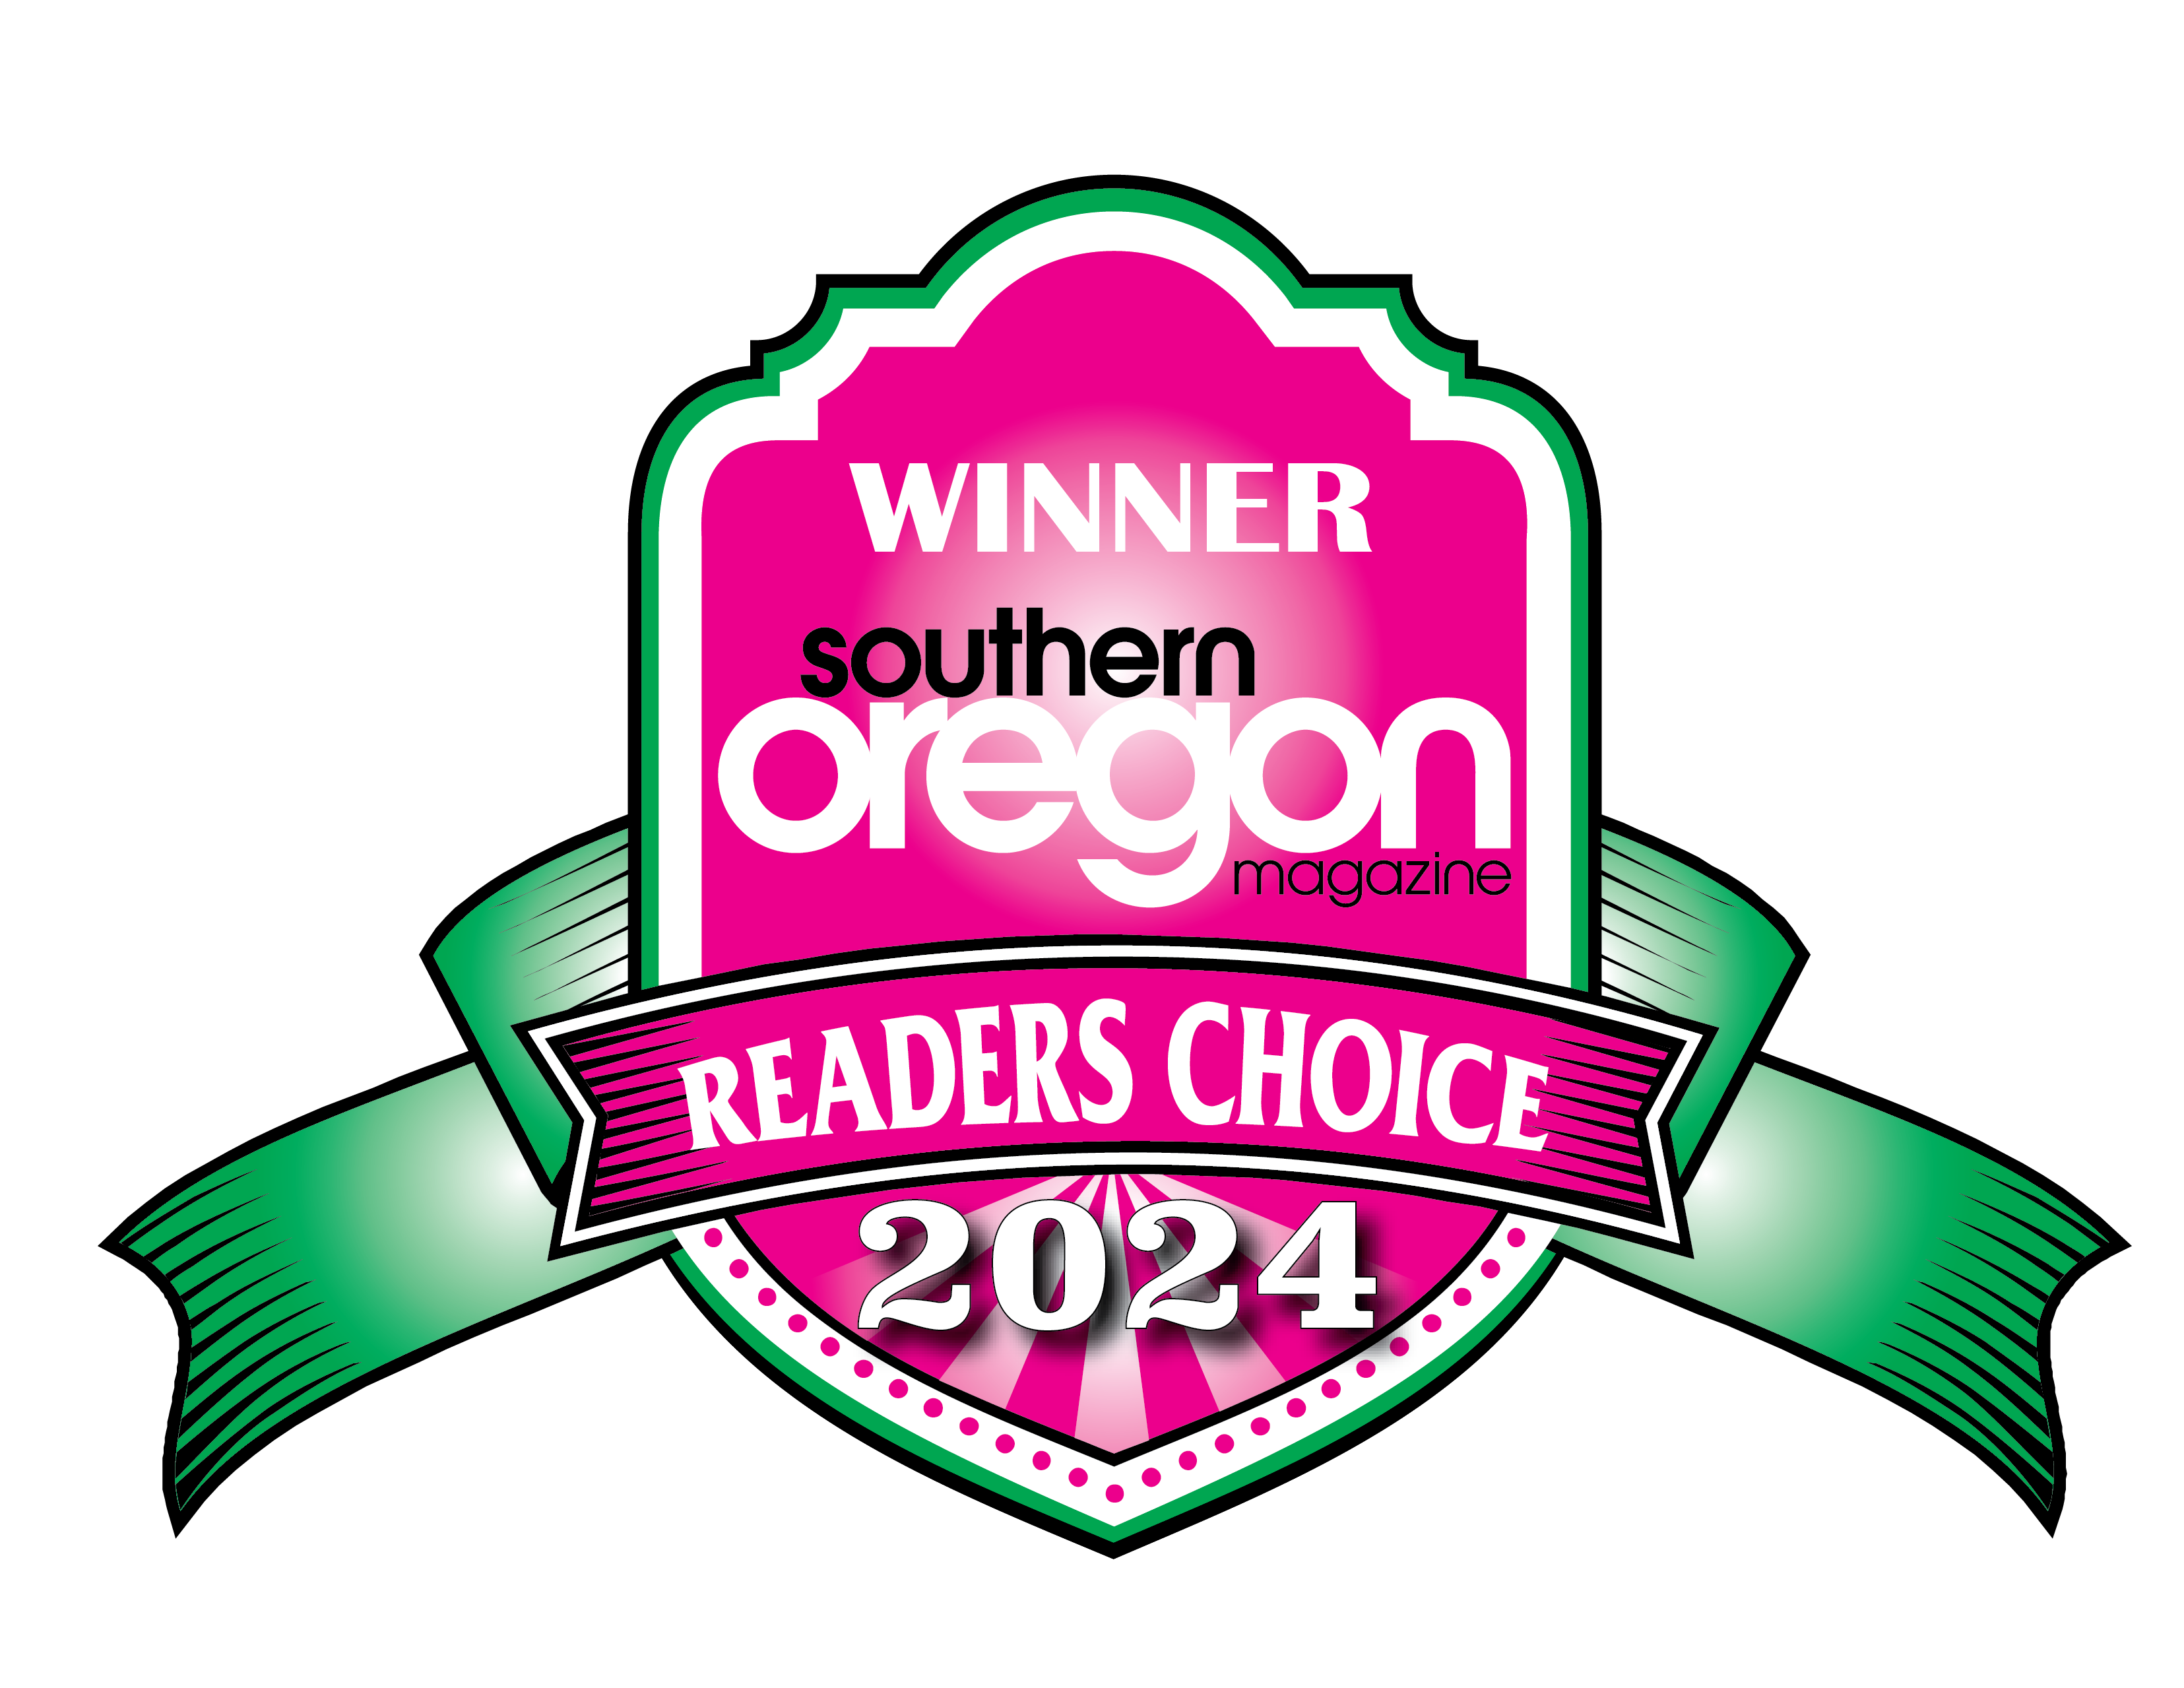 Southern Oregon Readers Choice 2024